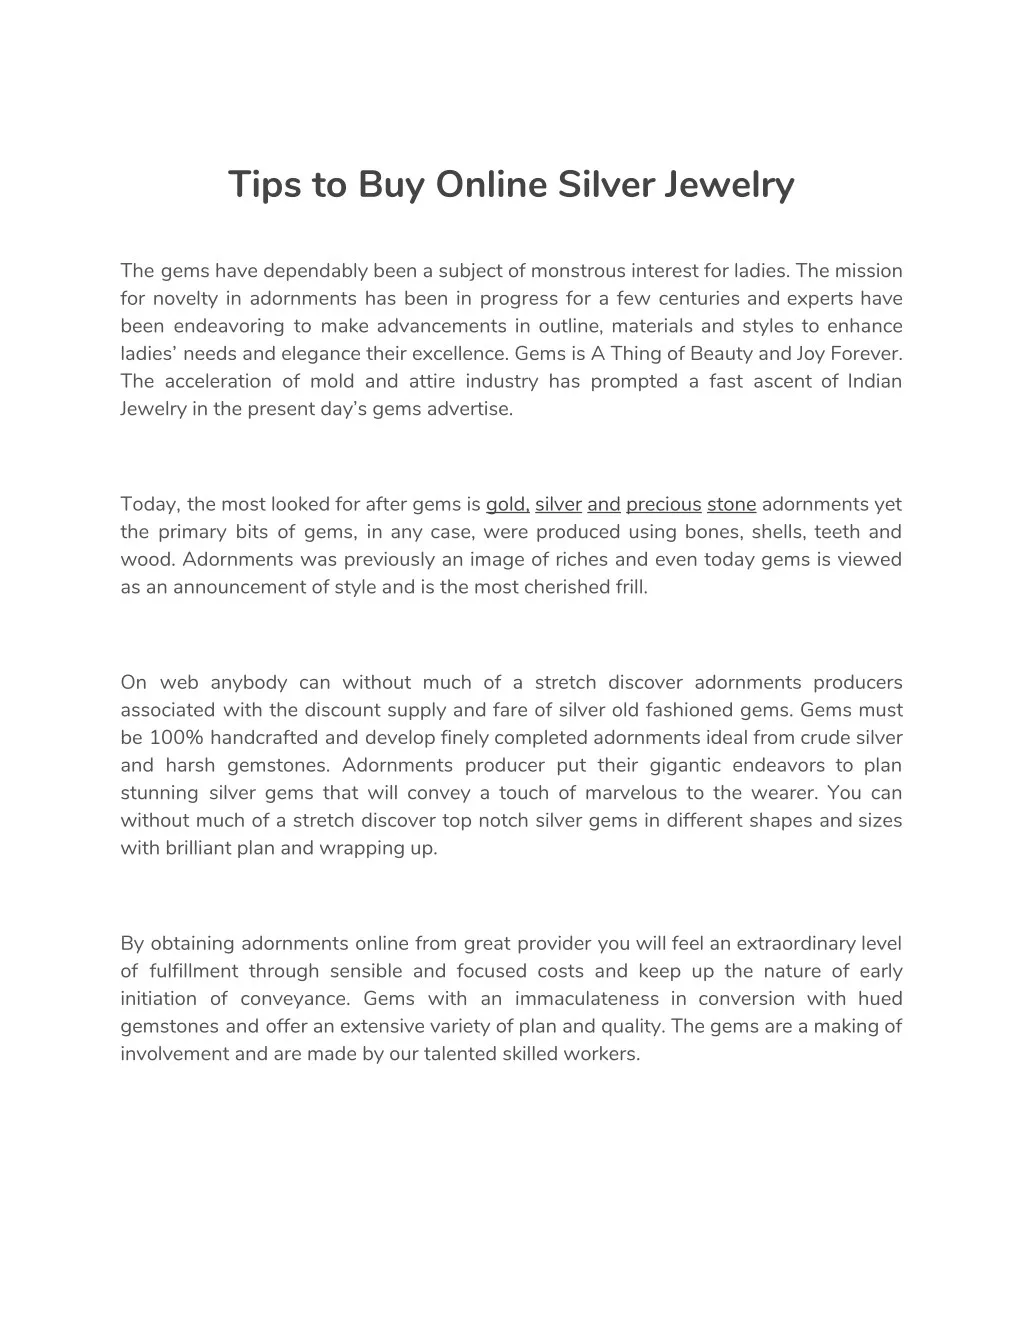 tips to buy online silver jewelry